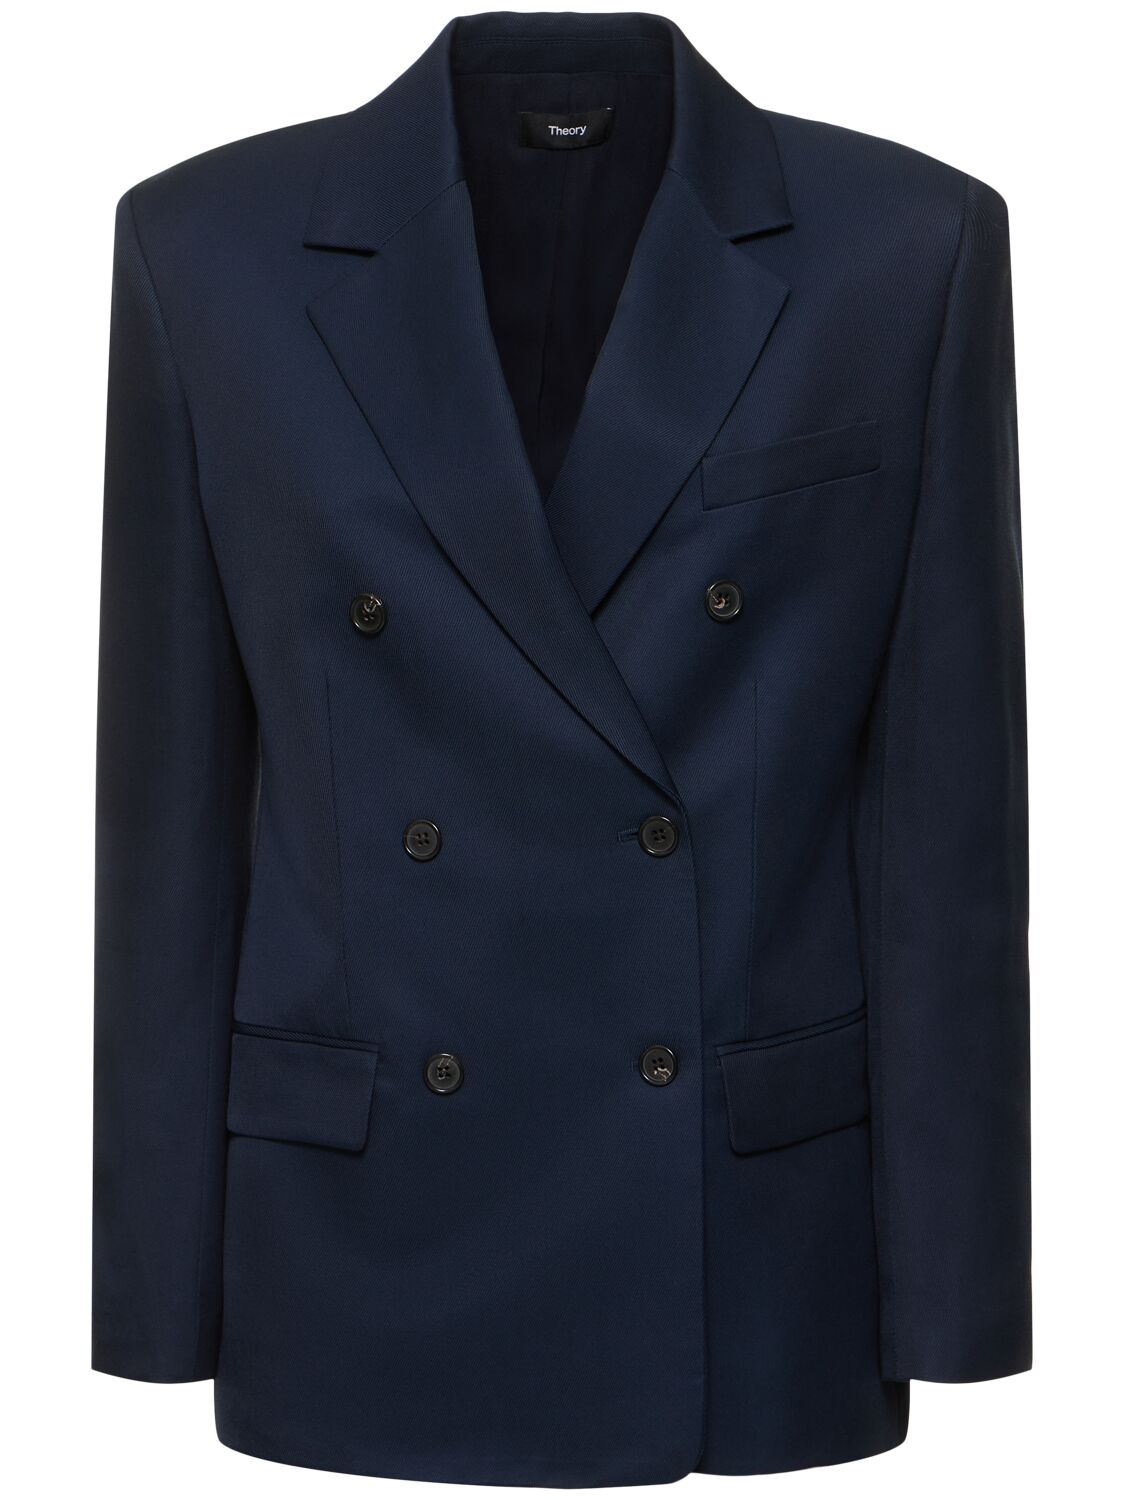 THEORY DOUBLE BREASTED VISCOSE JACKET